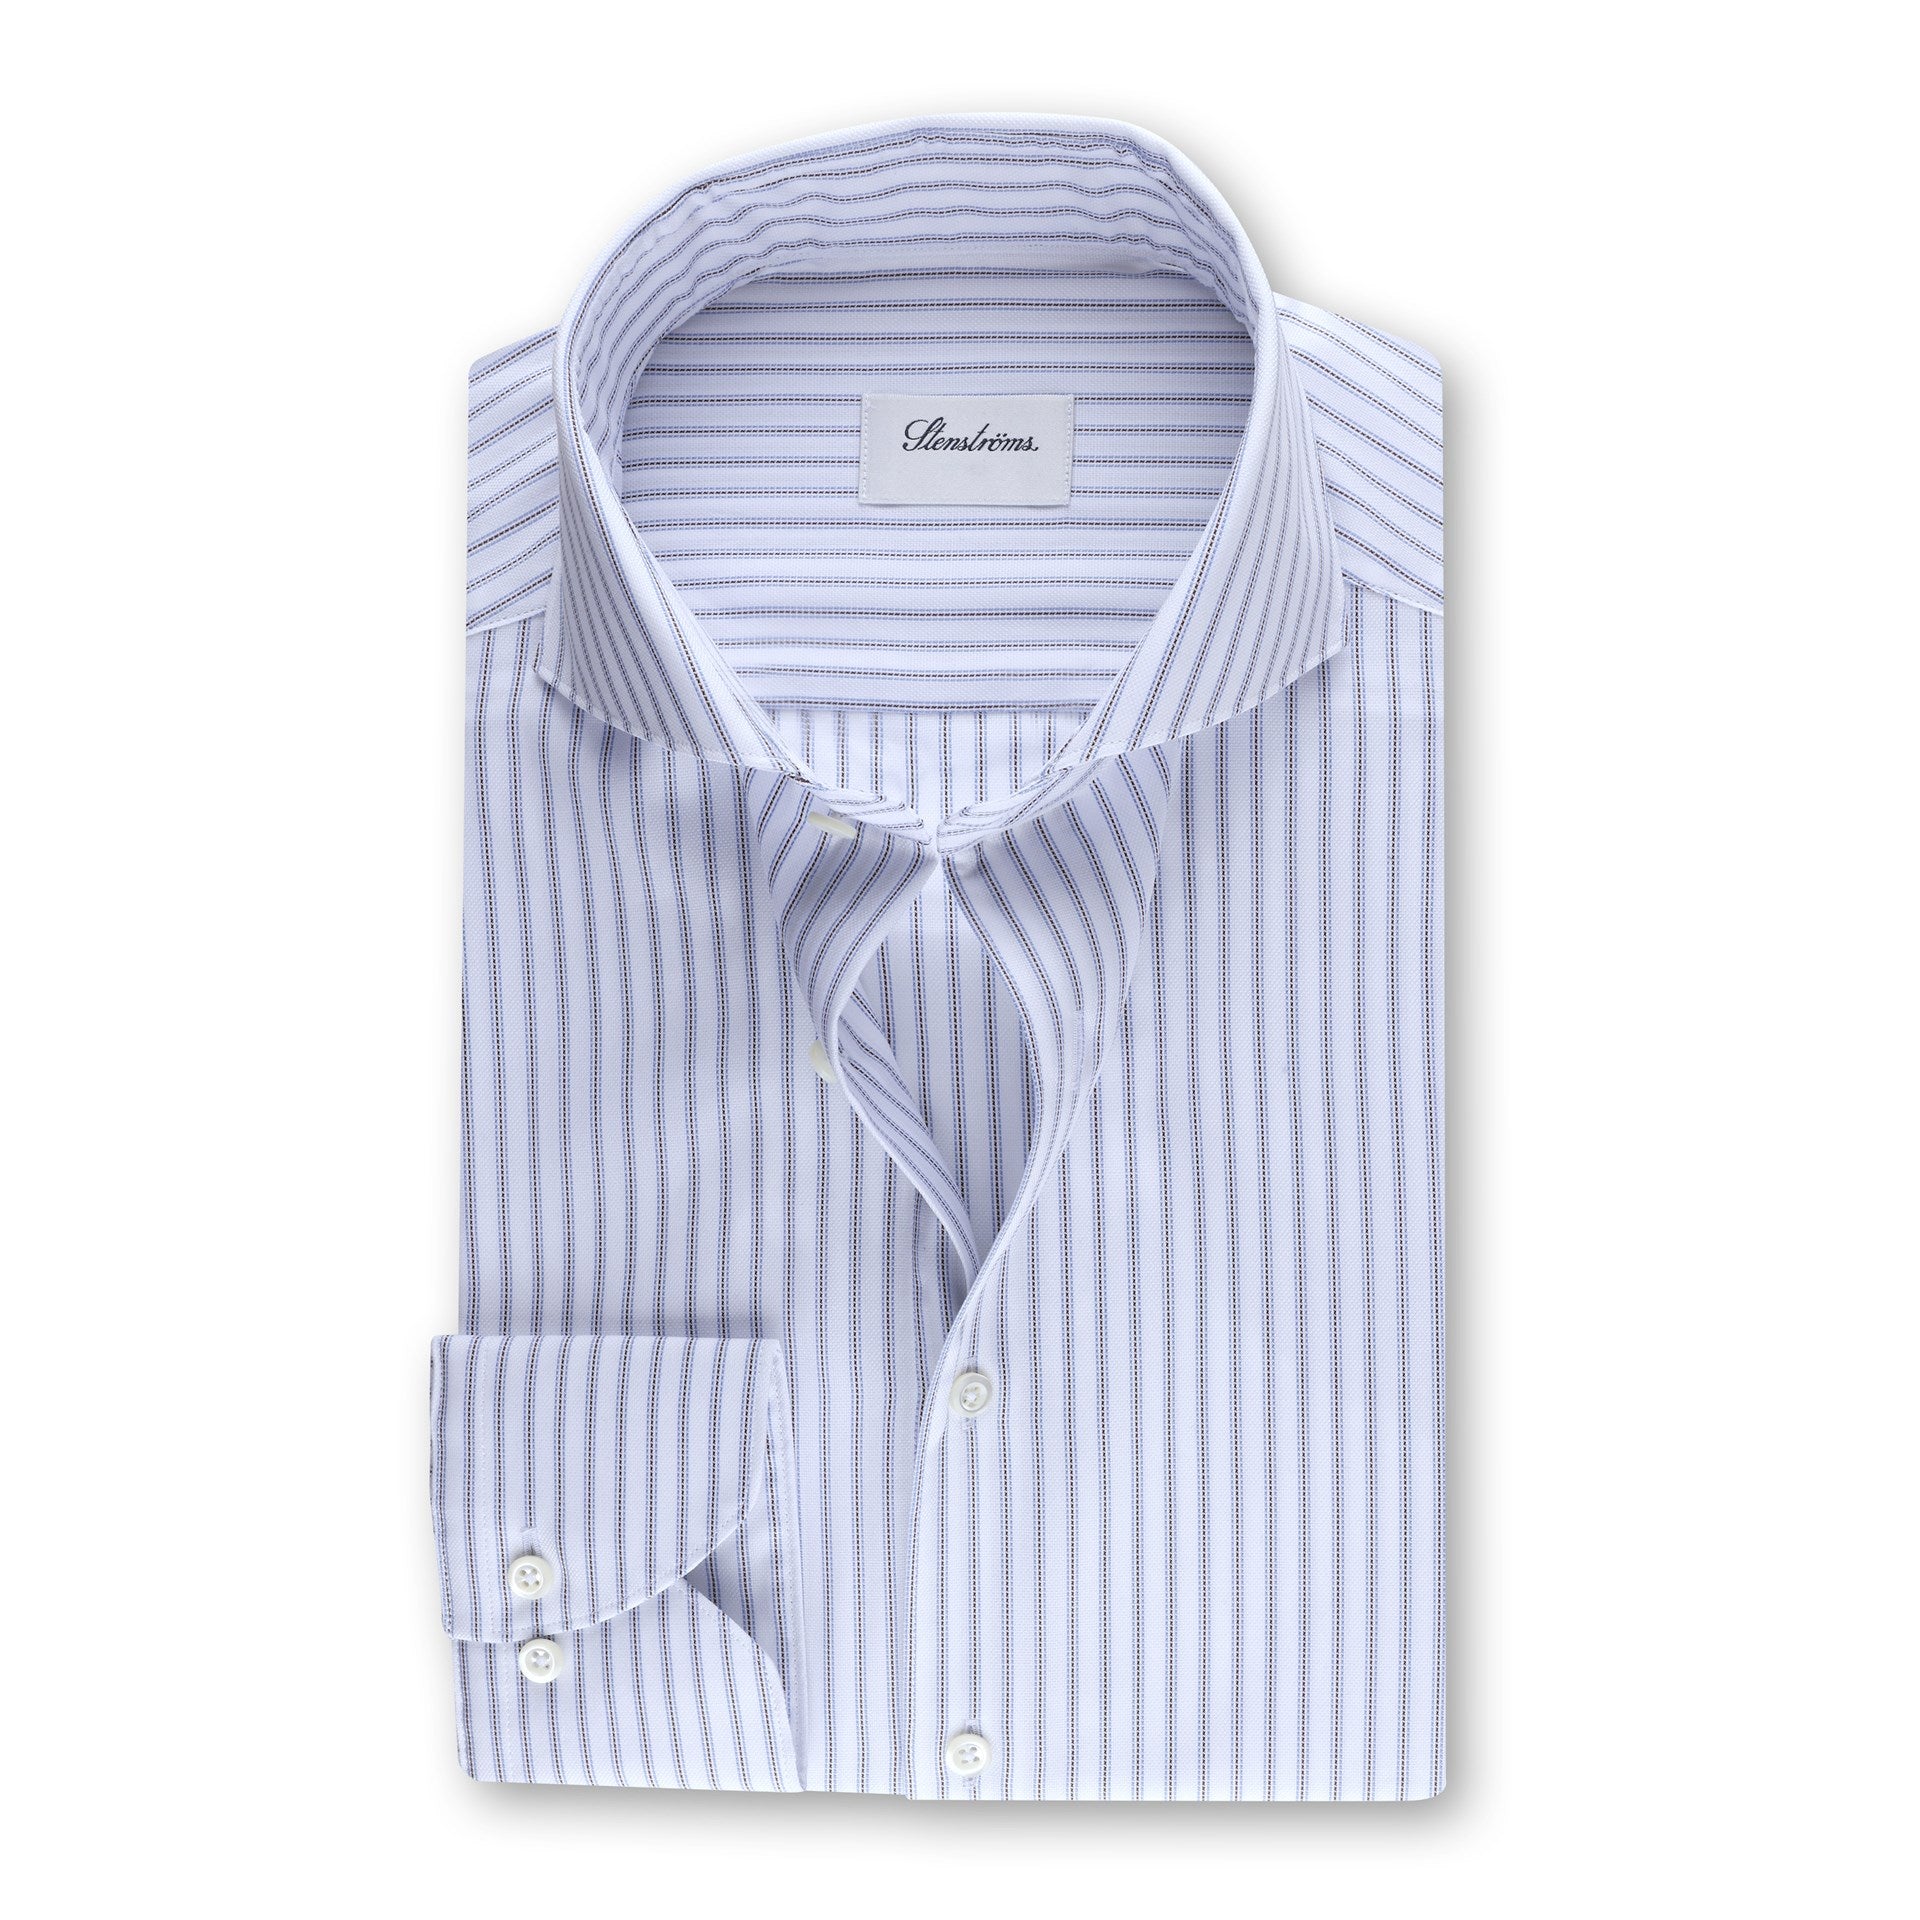 White Striped Oxford Shirt - Stenstroms Fitted Body